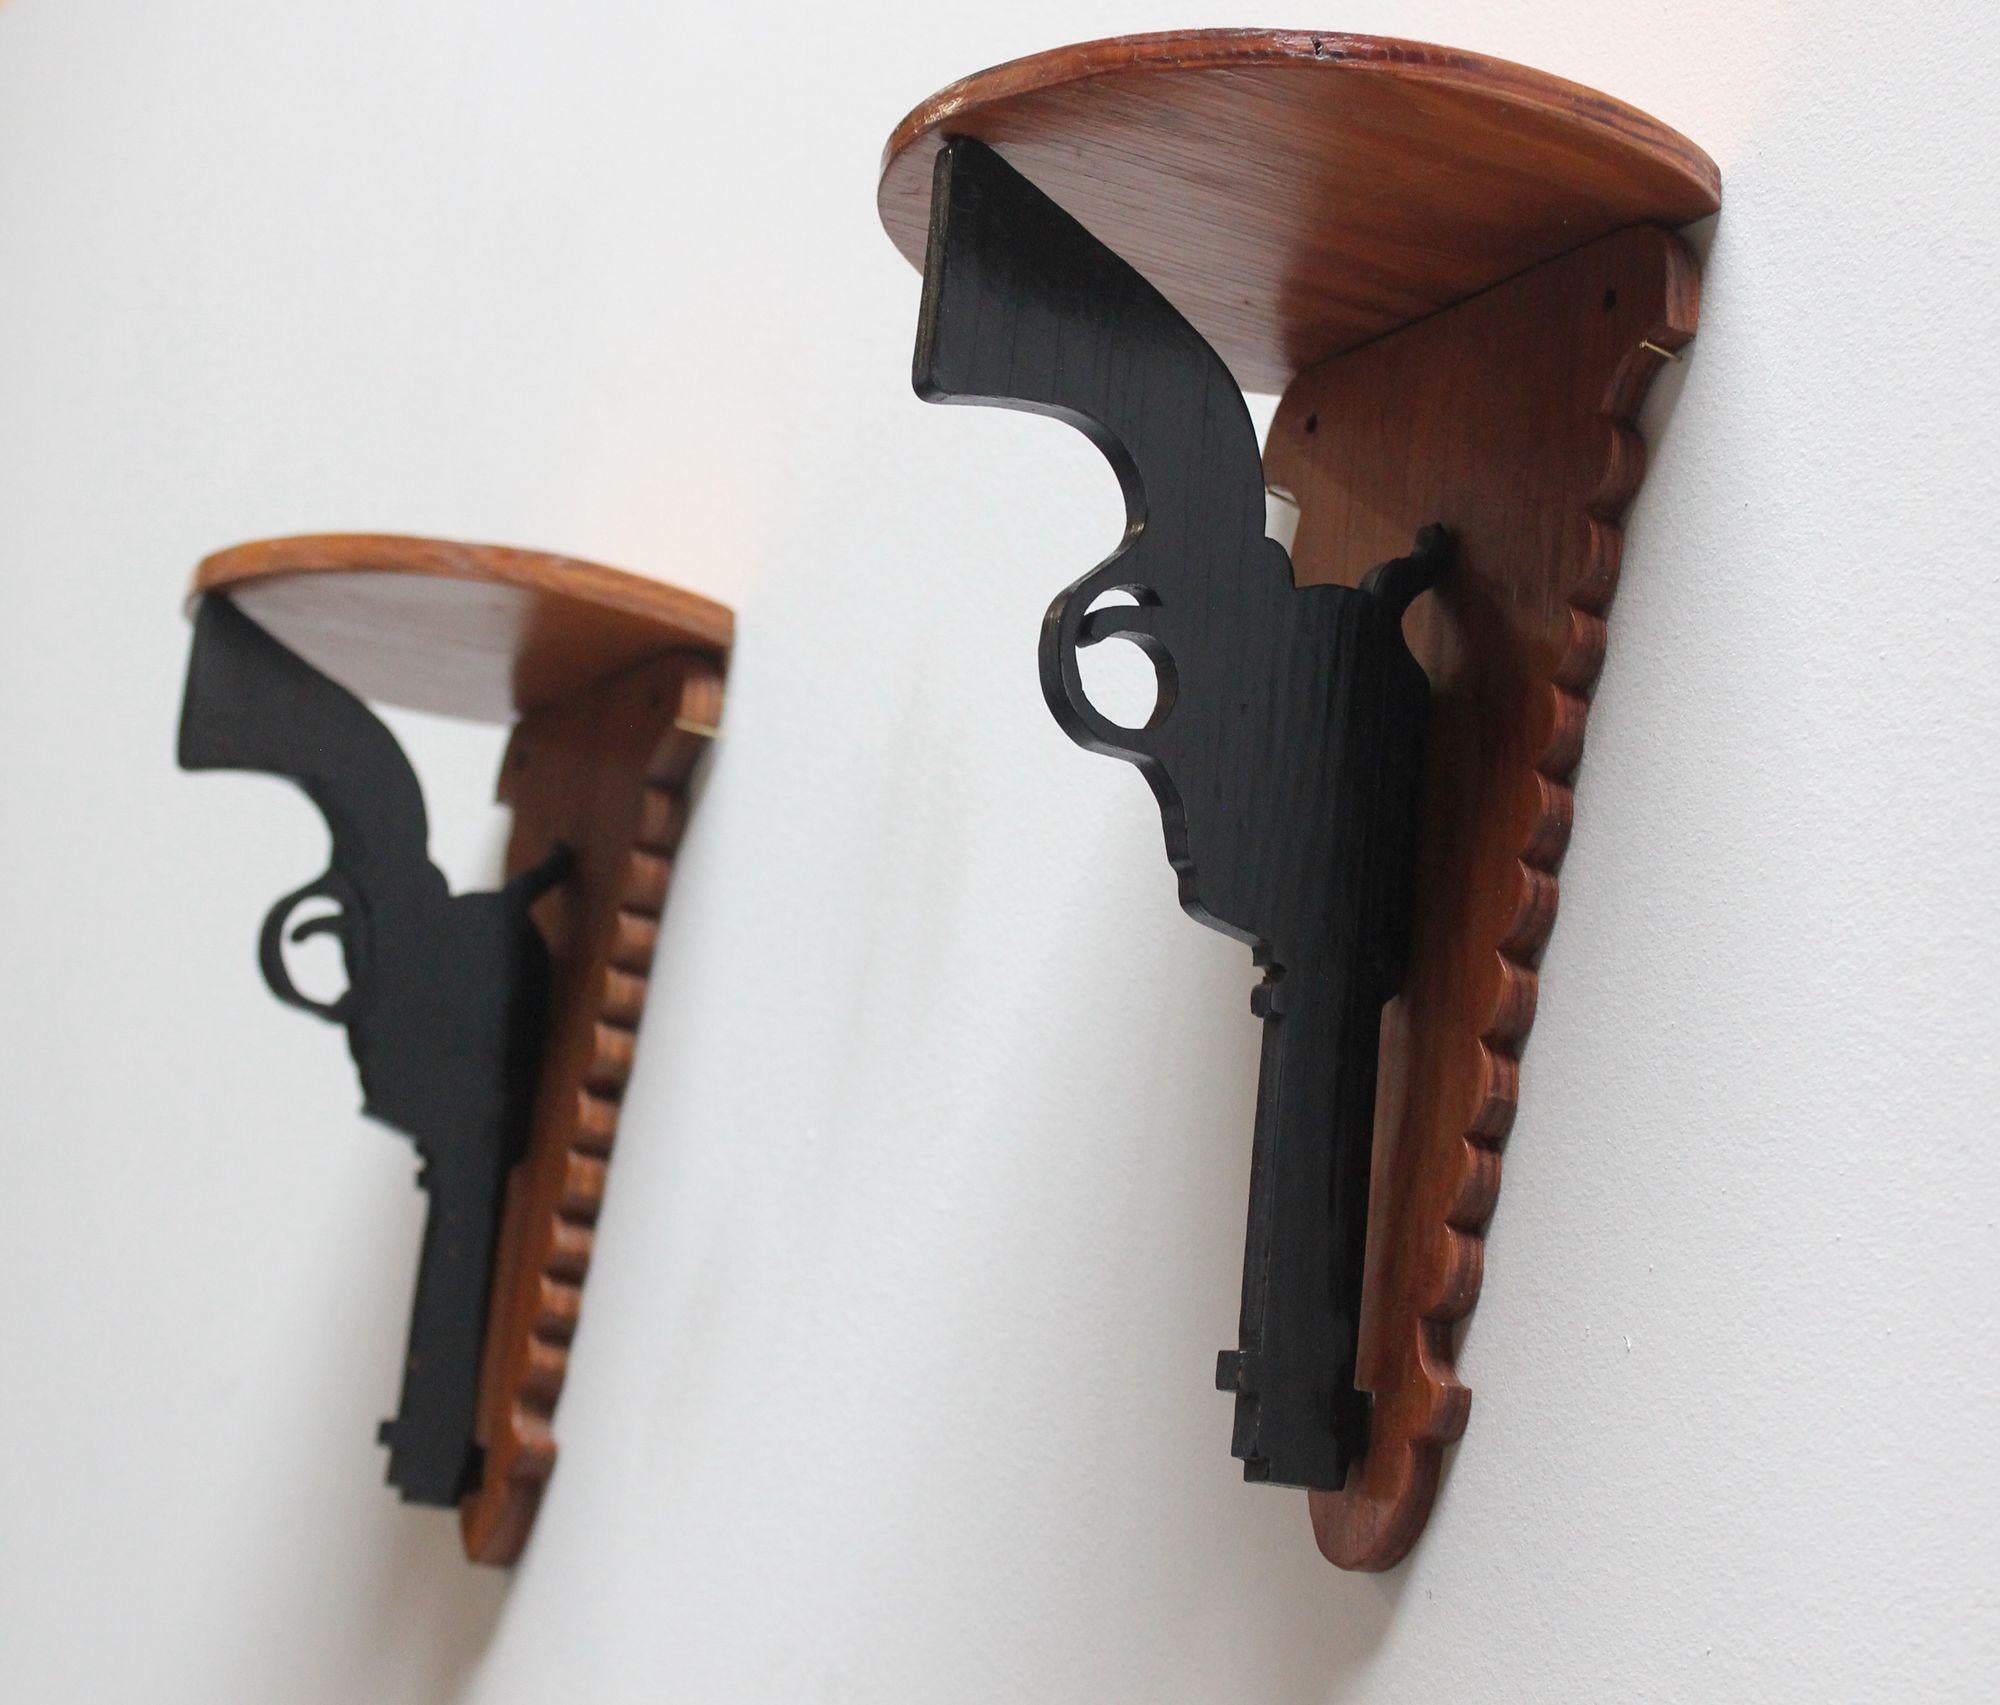 Pair of Folk Art hand-carved and painted revolver/pistol/handgun trade signs/wall brackets/corner shelves (ca. 1950s, USA).
All original black paint against stained plywood mounts supporting shallow shelf surfaces.
Very good, vintage condition with